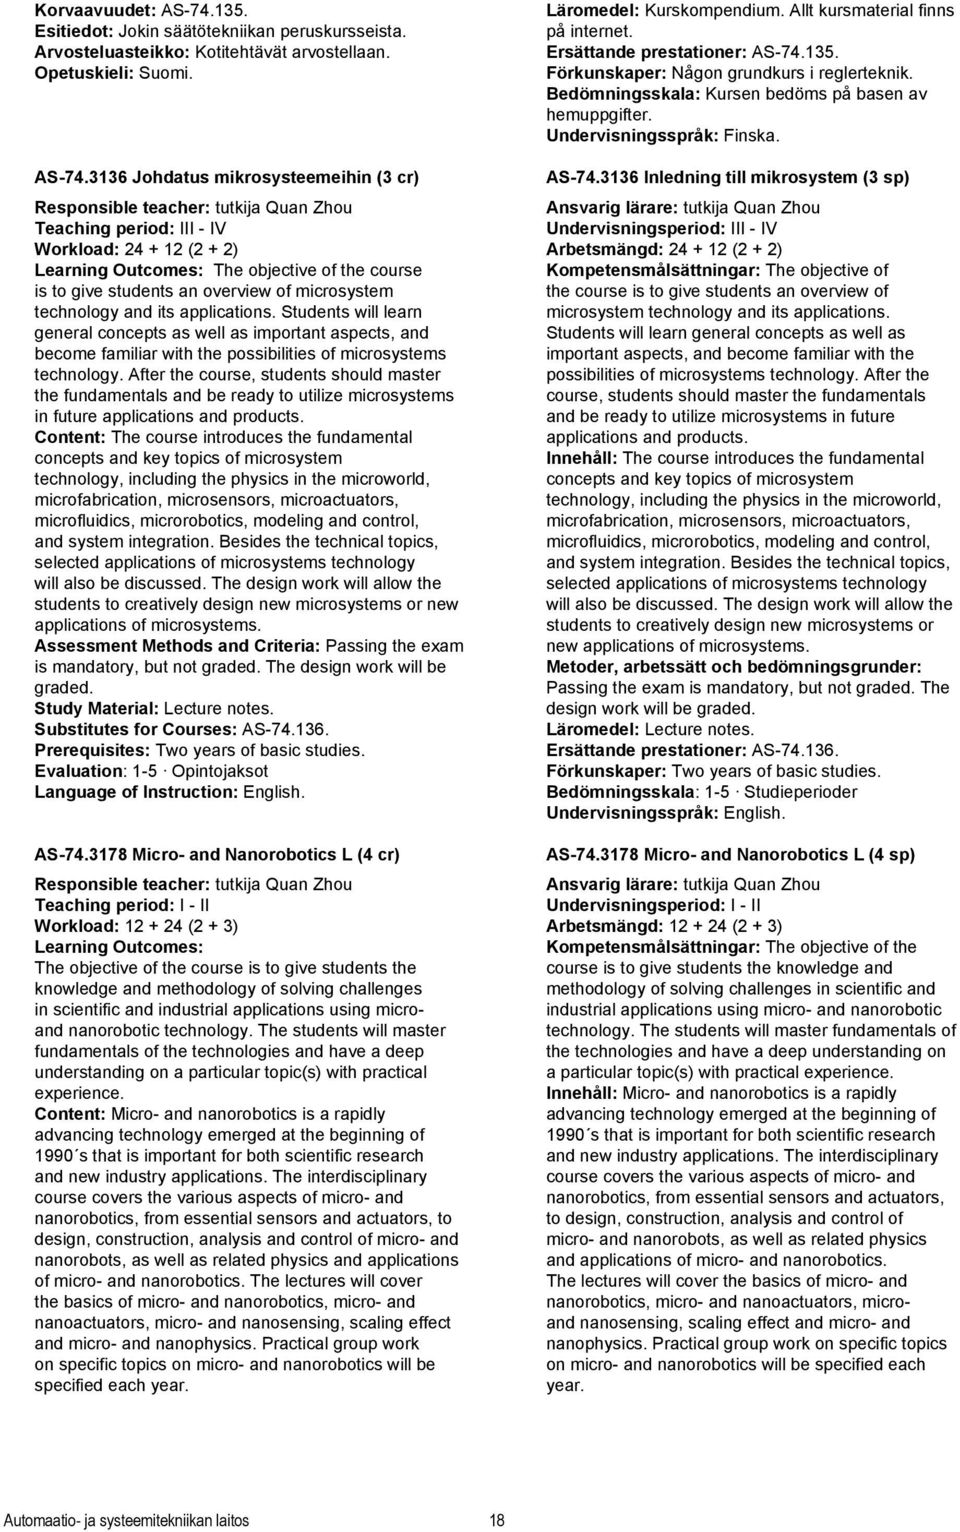 3136 Johdatus mikrosysteemeihin (3 cr) Responsible teacher: tutkija Quan Zhou Teaching period: III - IV Workload: 24 + 12 (2 + 2) Learning Outcomes: The objective of the course is to give students an